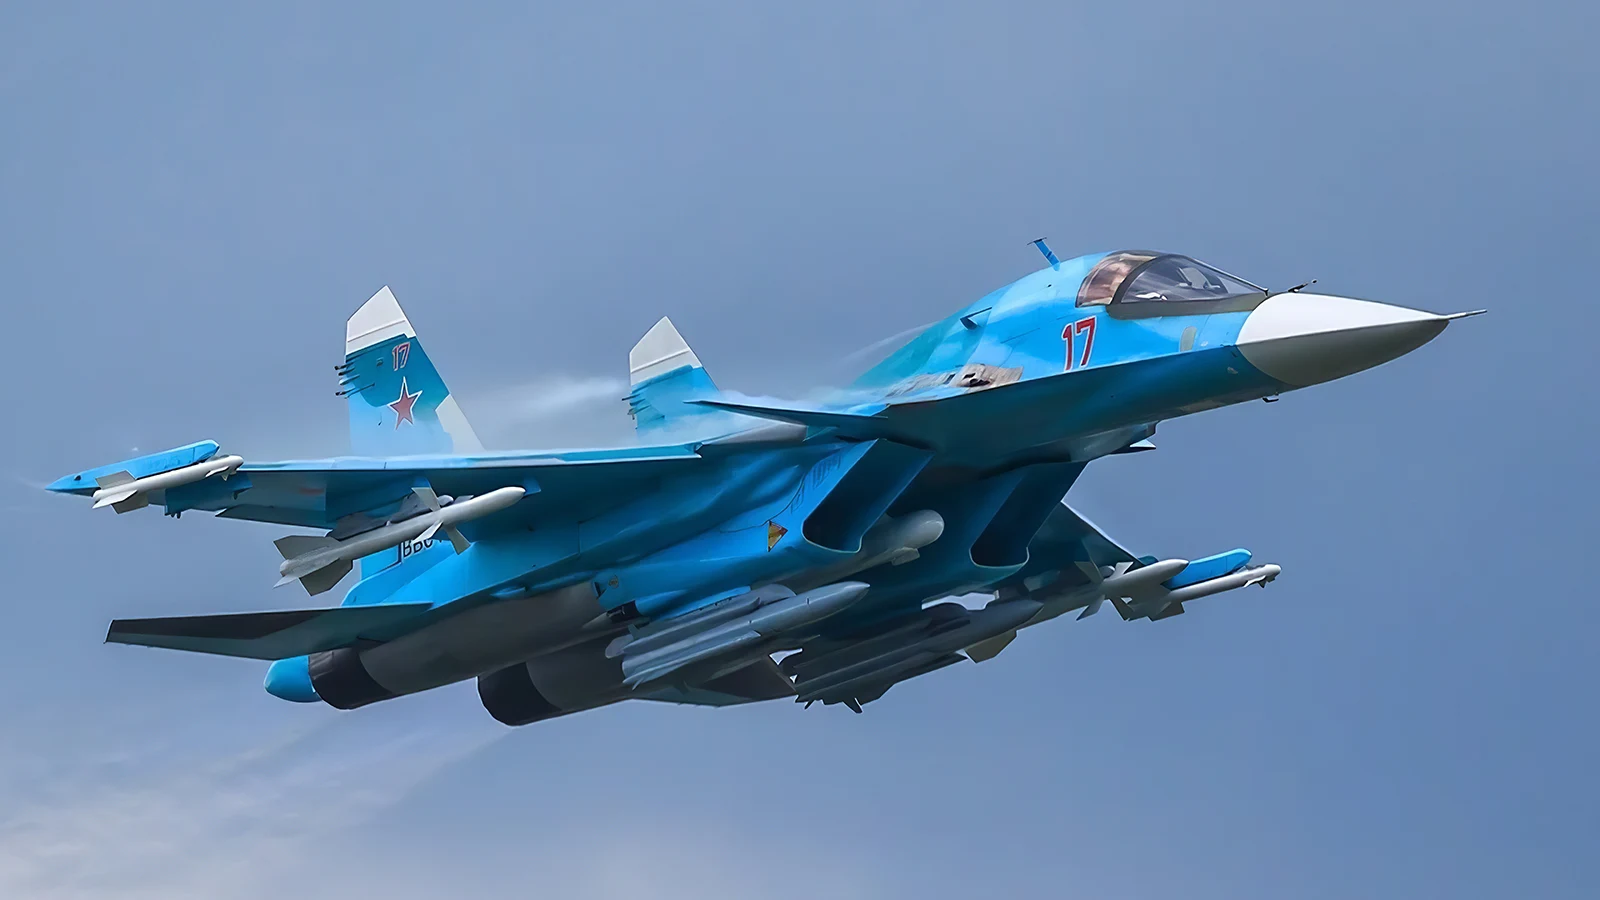 Russian Air Force has suffered heavy losses in Ukraine